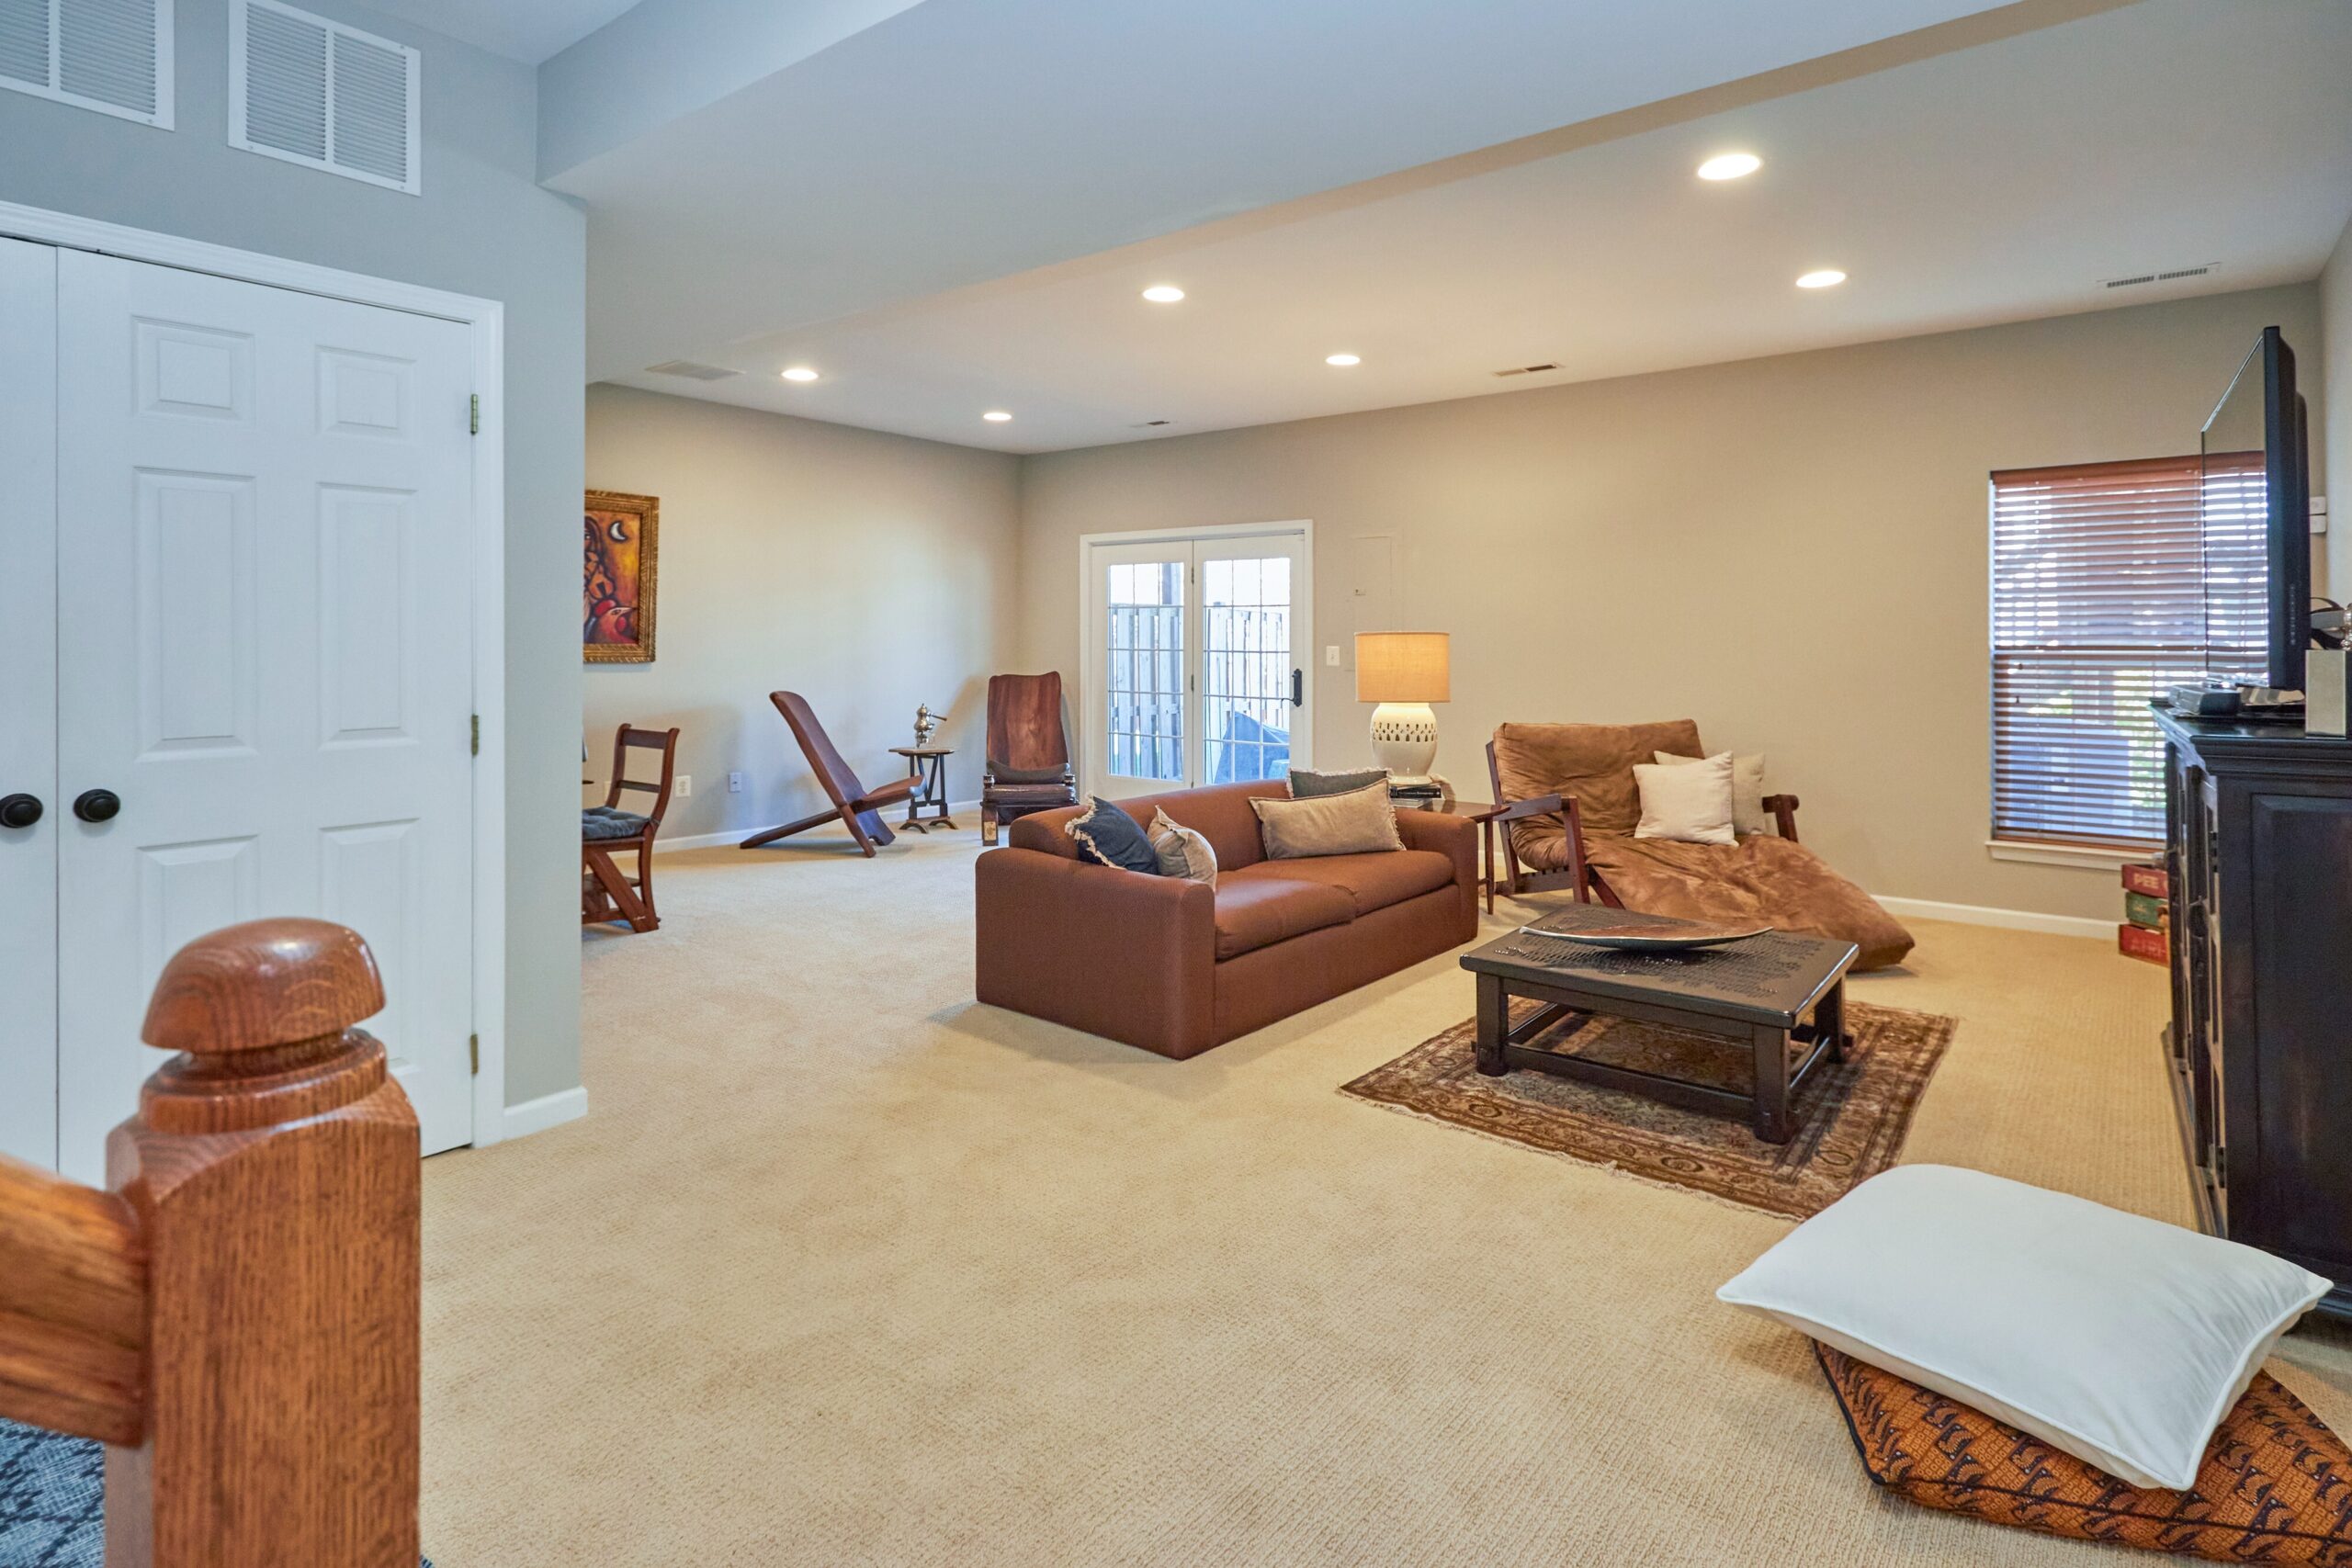 Professional interior photo of 25499 Beresford Drive, Chantilly, Virginia - showing the ground floor living area, a big carpeted, open room  with multiple entertaining spaces